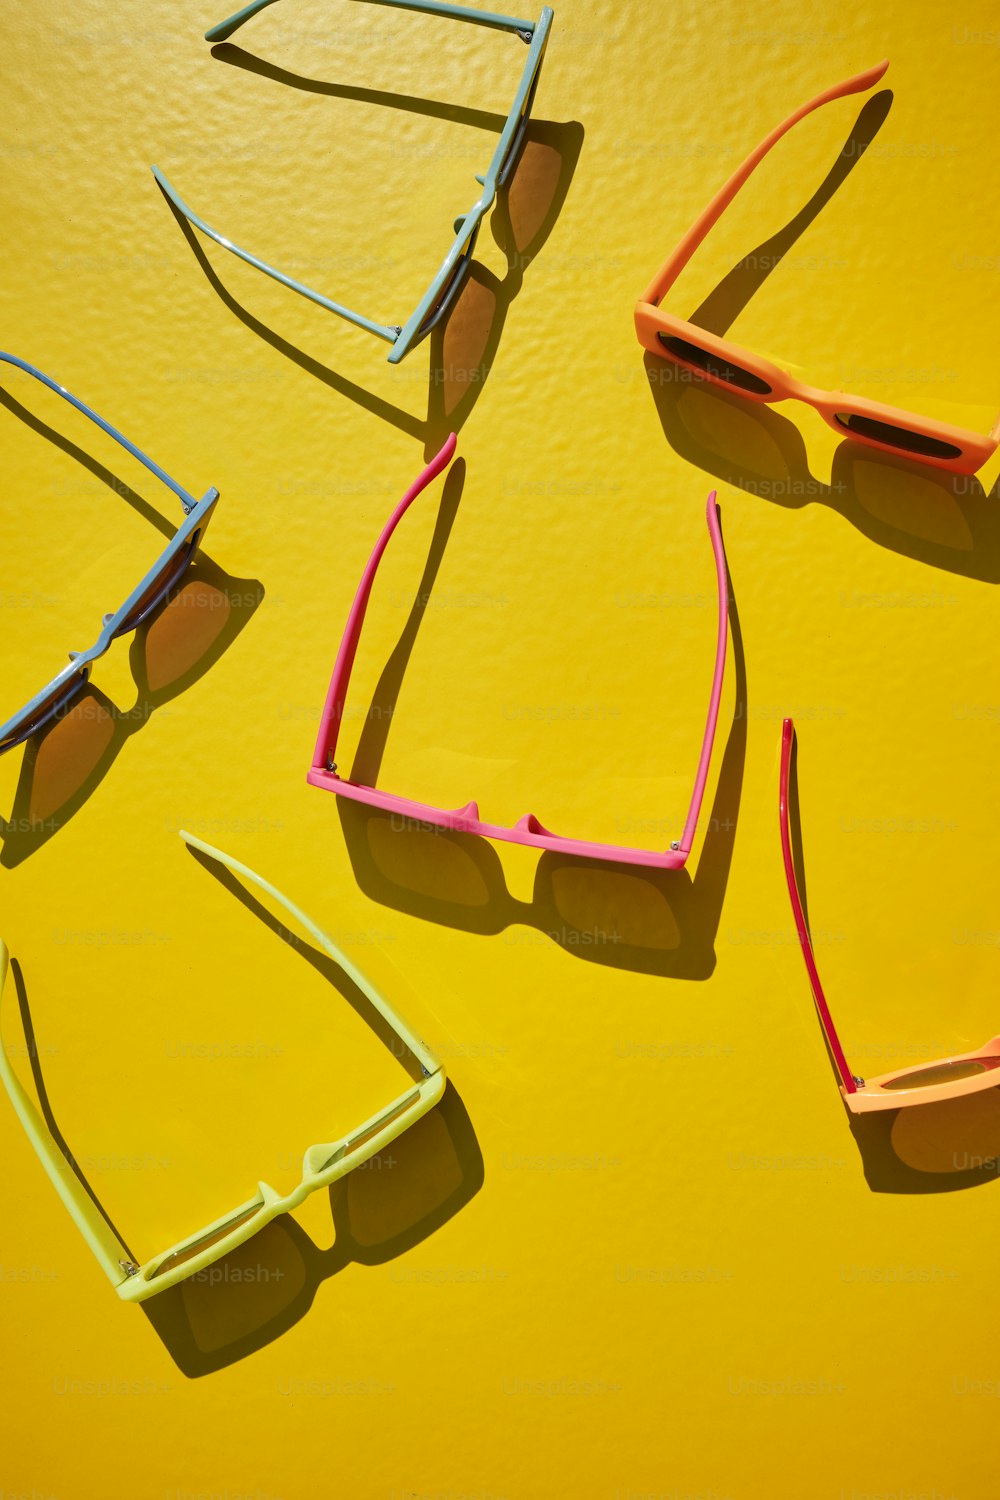 four pairs of sunglasses sitting on top of a yellow surface